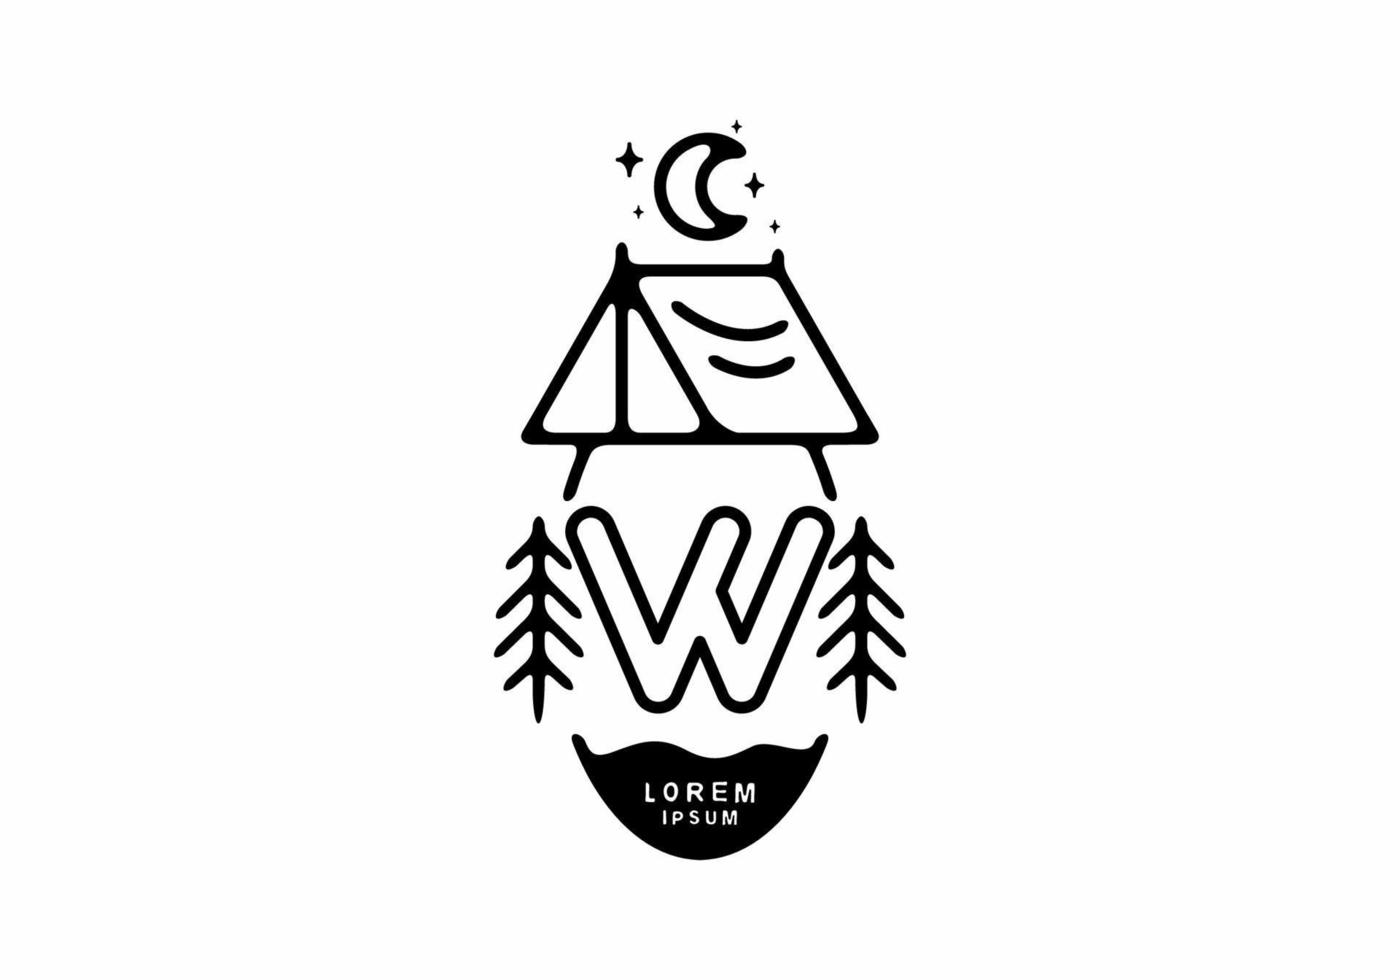 Black line art illustration of camping tent badge with W letter vector